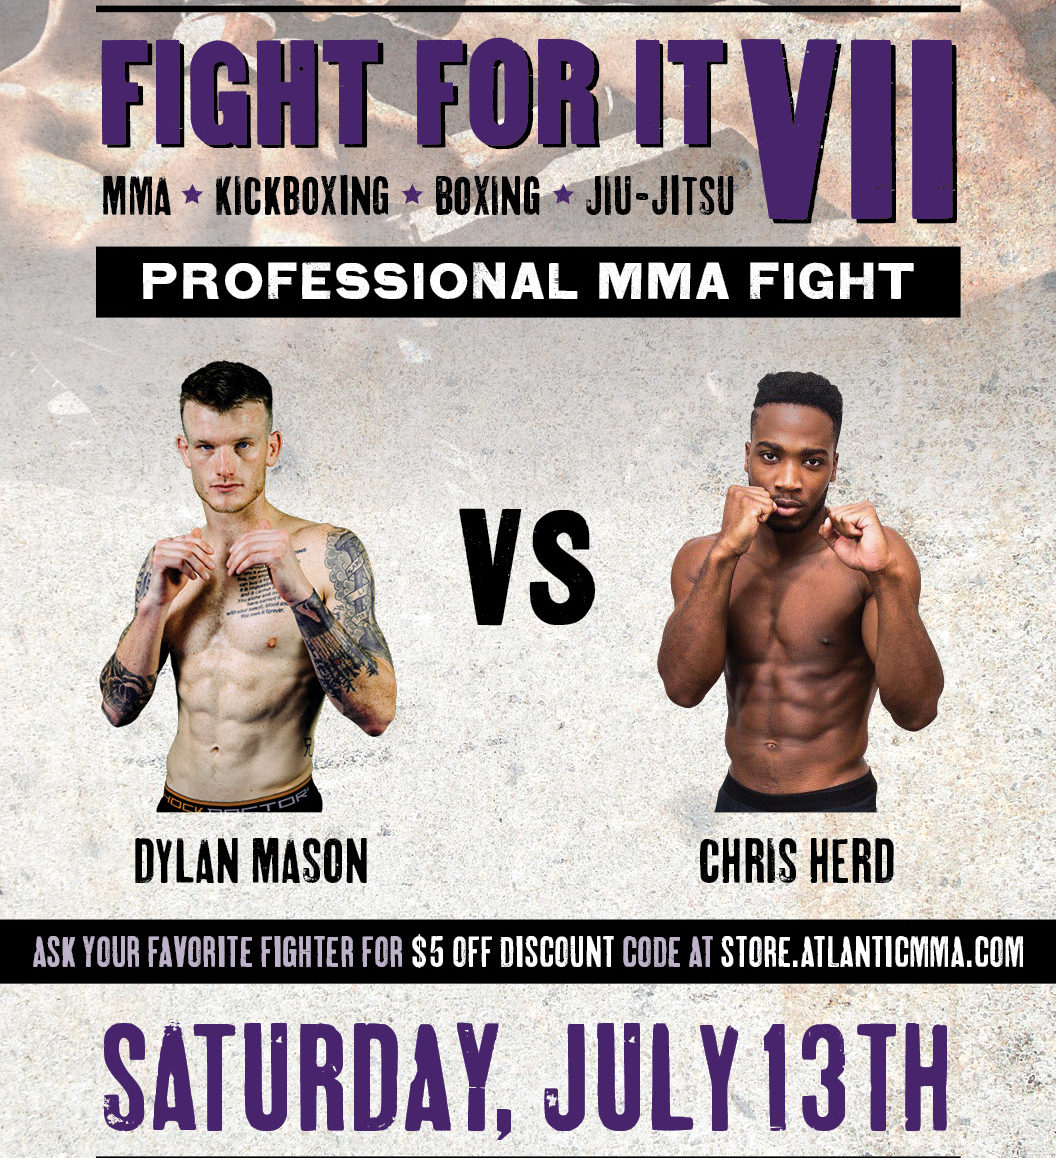 Highly Touted Amateurs Dylan Mason And Chris Herd Meet As Pros At Fight For It Vii Fight For It